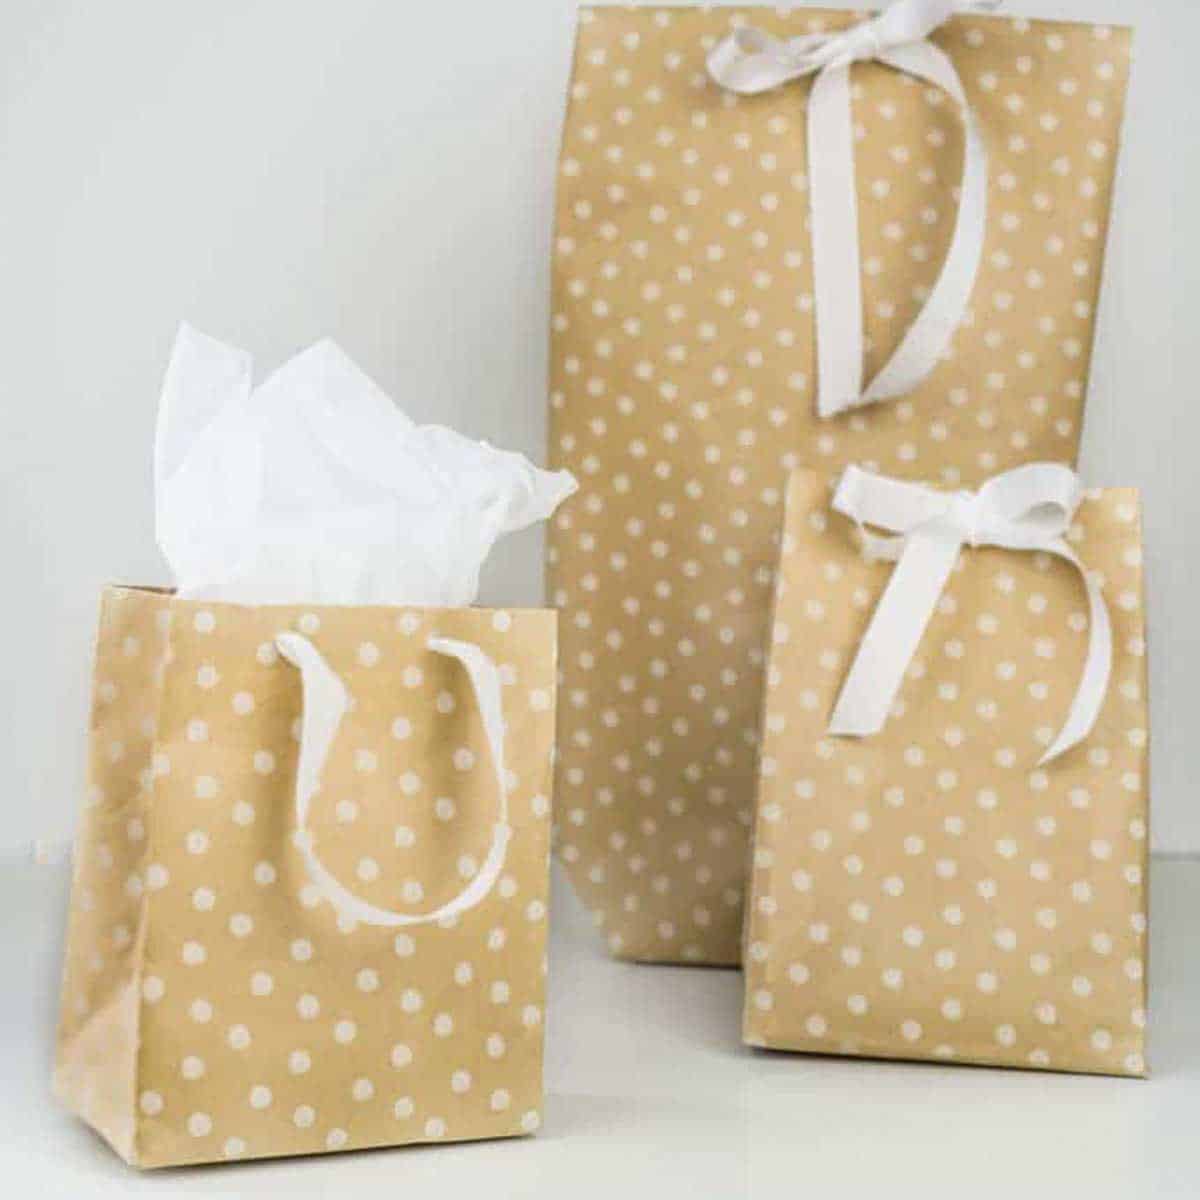 How to Wrap Gift Boxes (with Pictures)